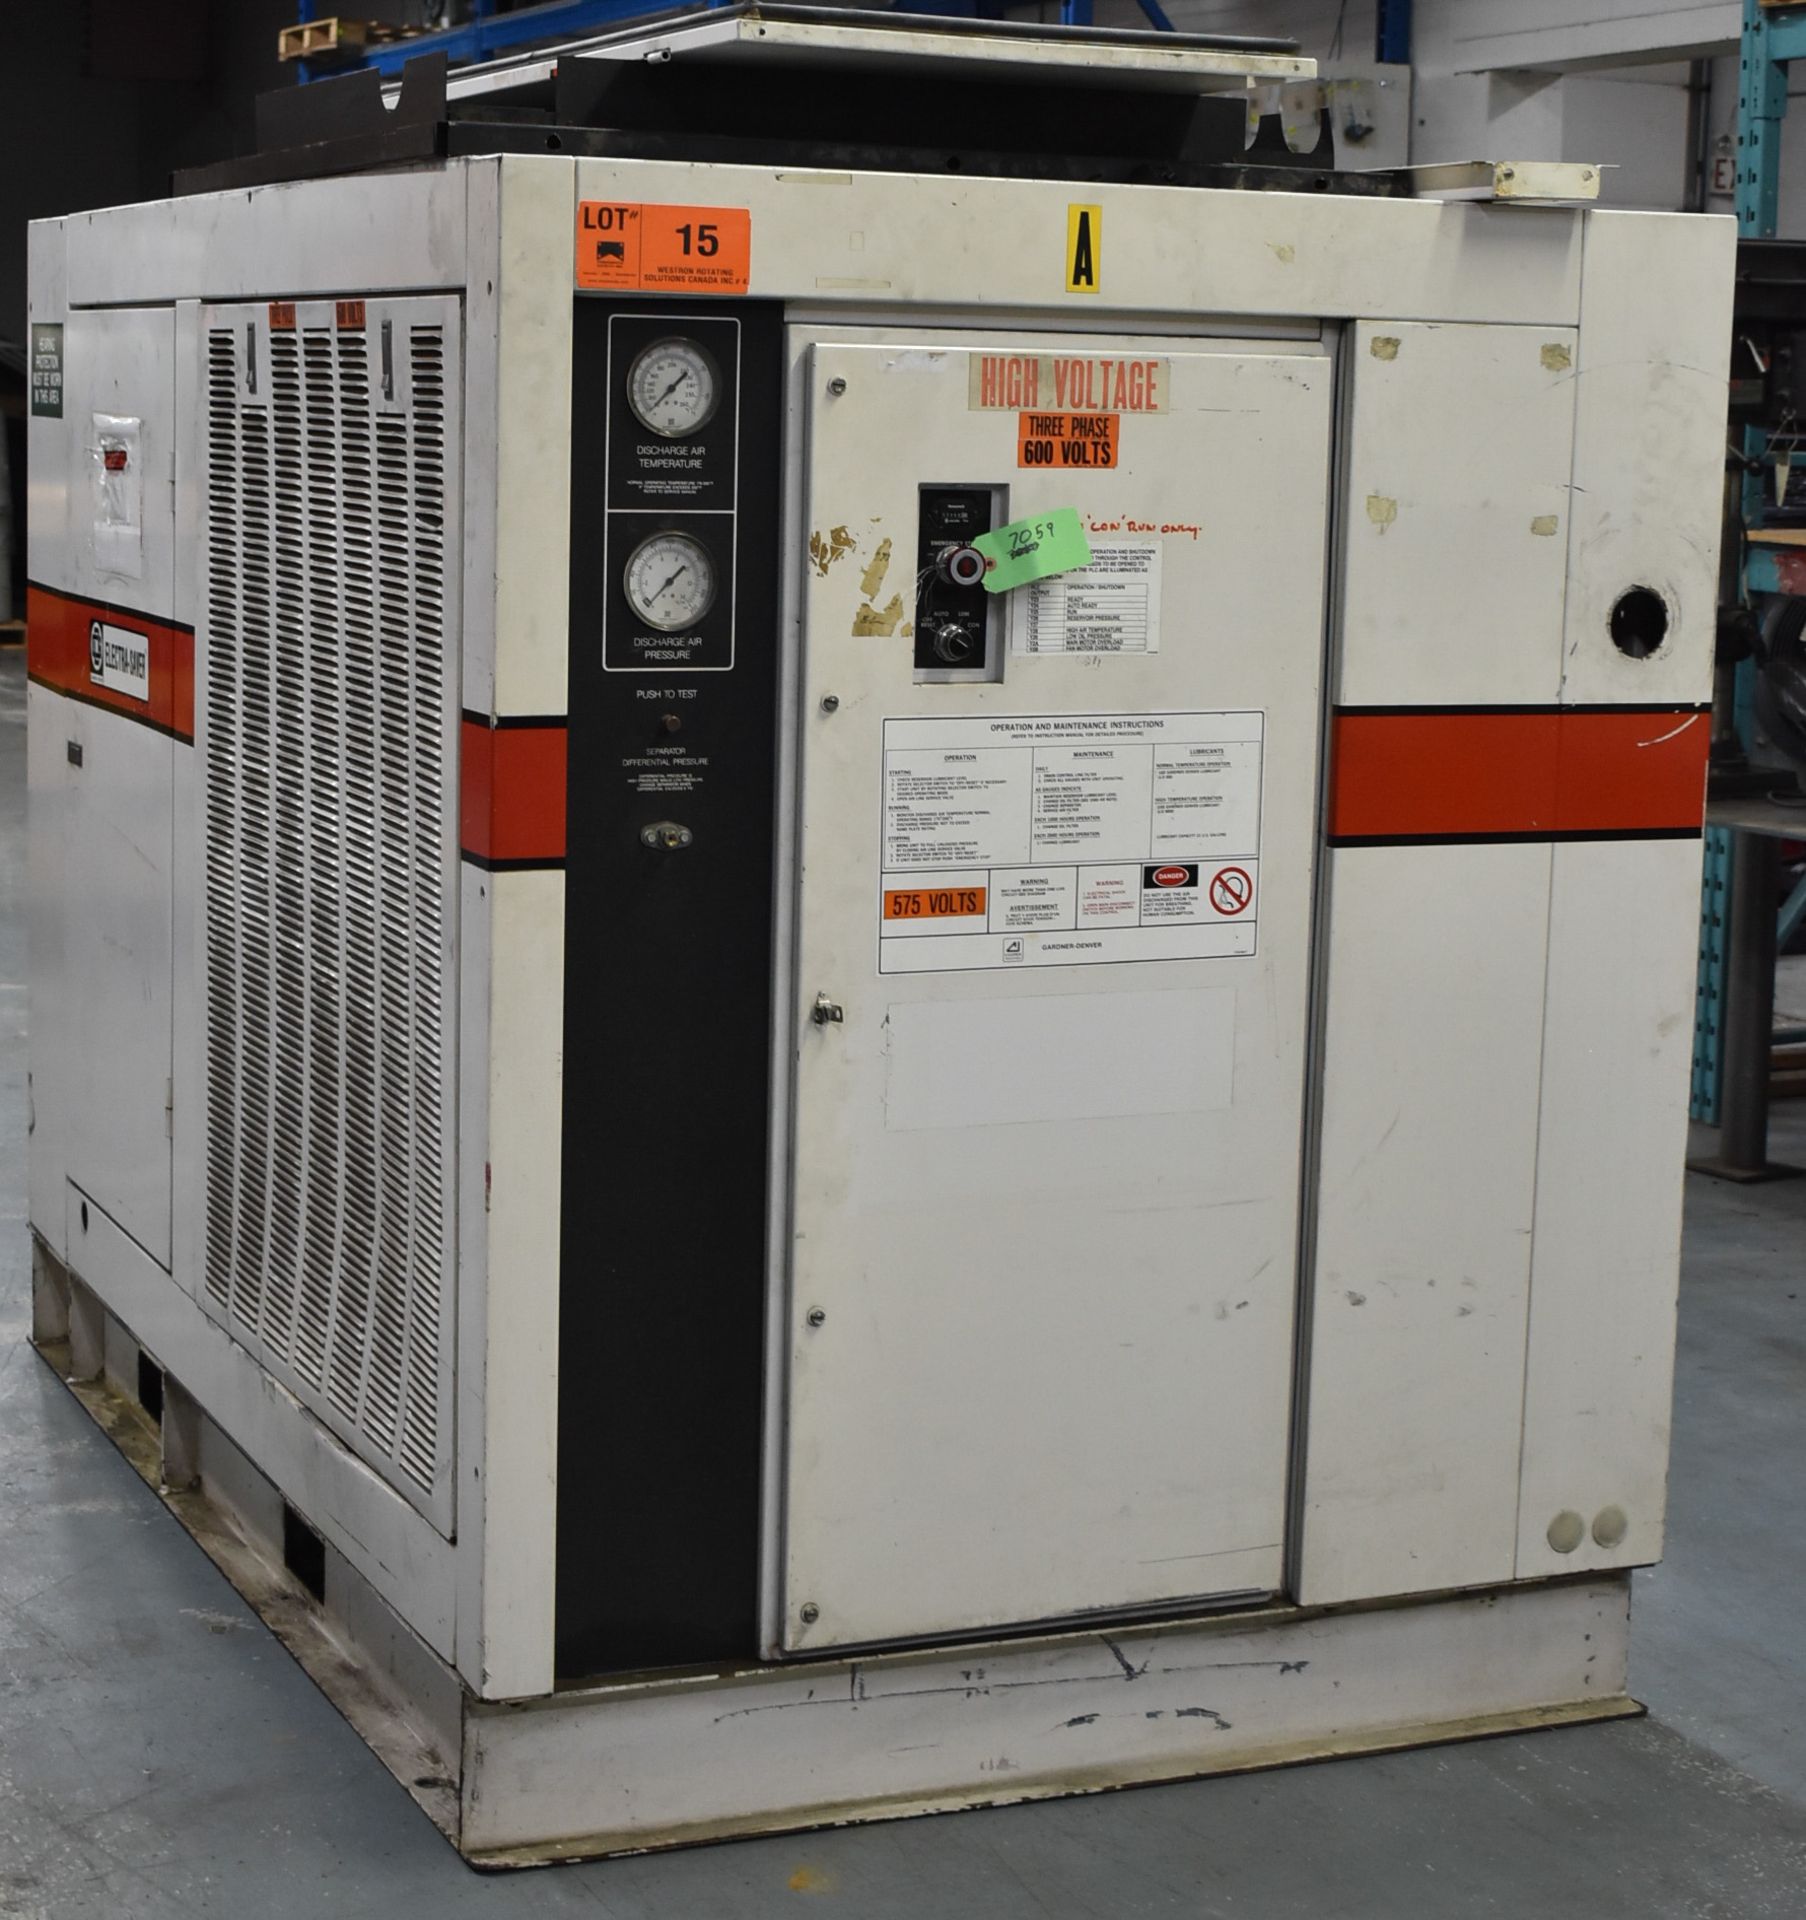 GARDNER DENVER EAP0MB ELECTRA SAVER II ROTARY SCREW AIR COMPRESSOR WITH 100 HP, 25 PSI, 2488 HRS (